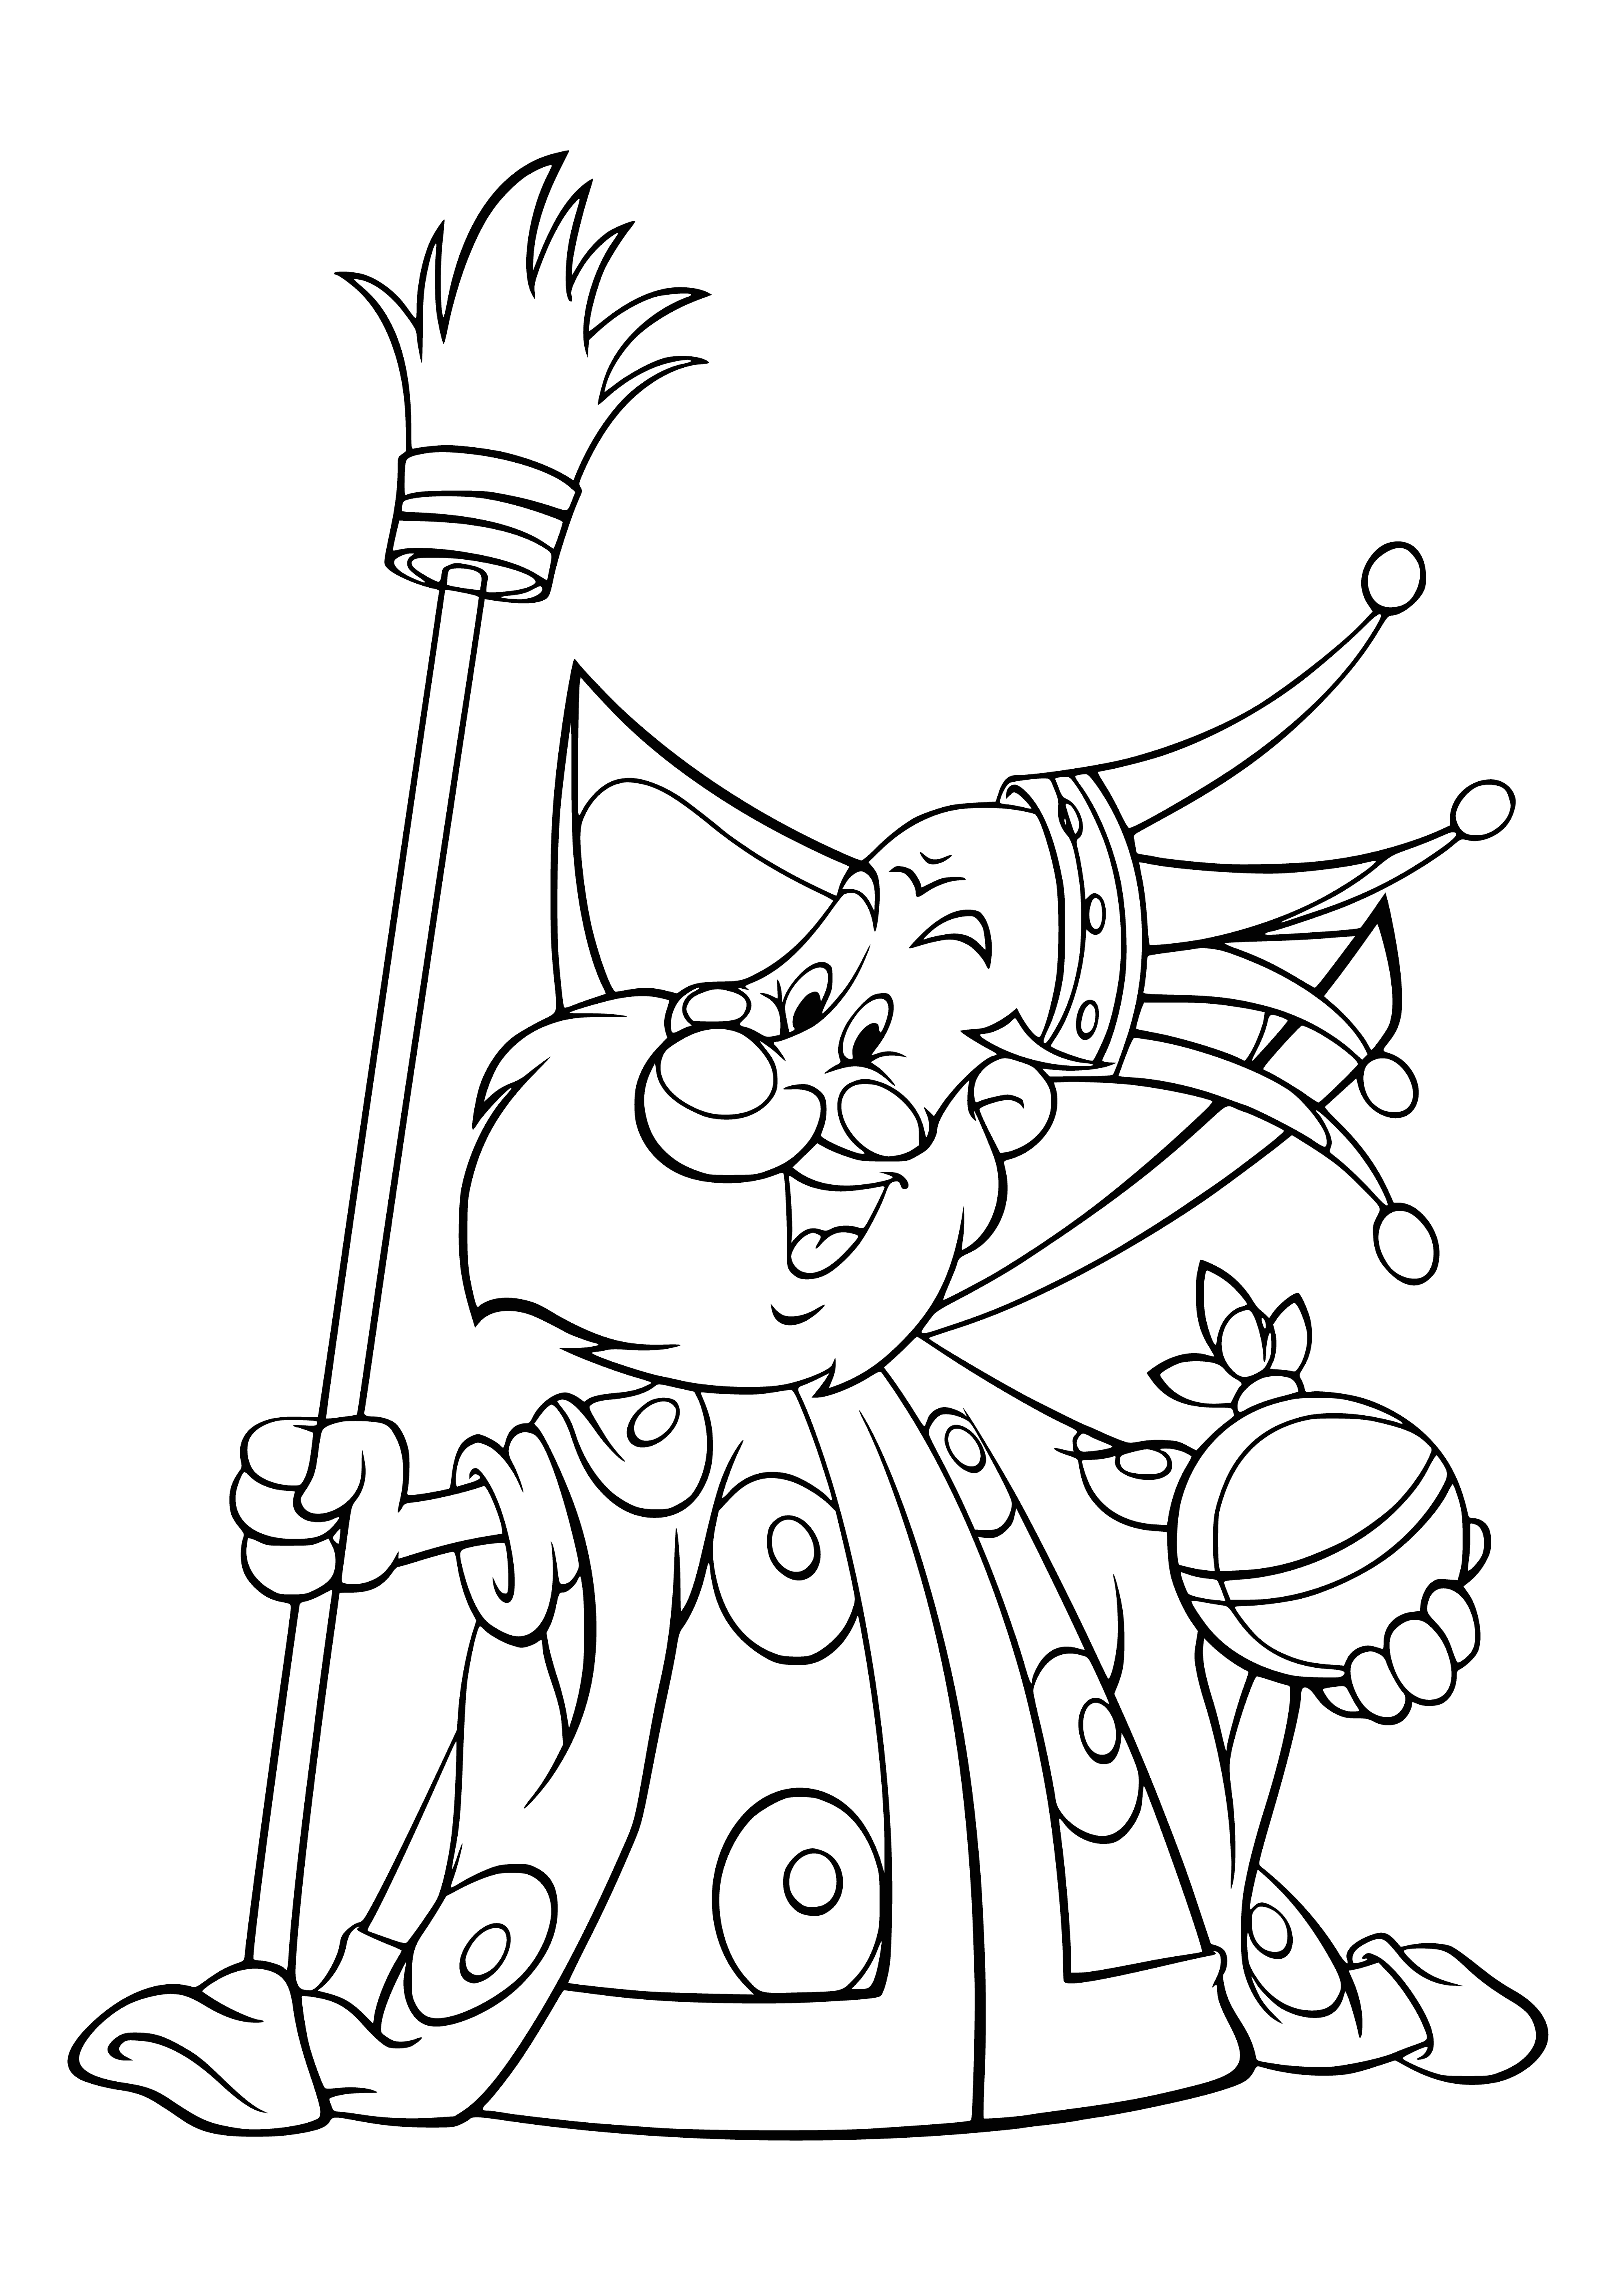 coloring page: In Tsar, Vovka is a feared creature with sharp claws, dark fur, and a long tail that can kill with a glance.